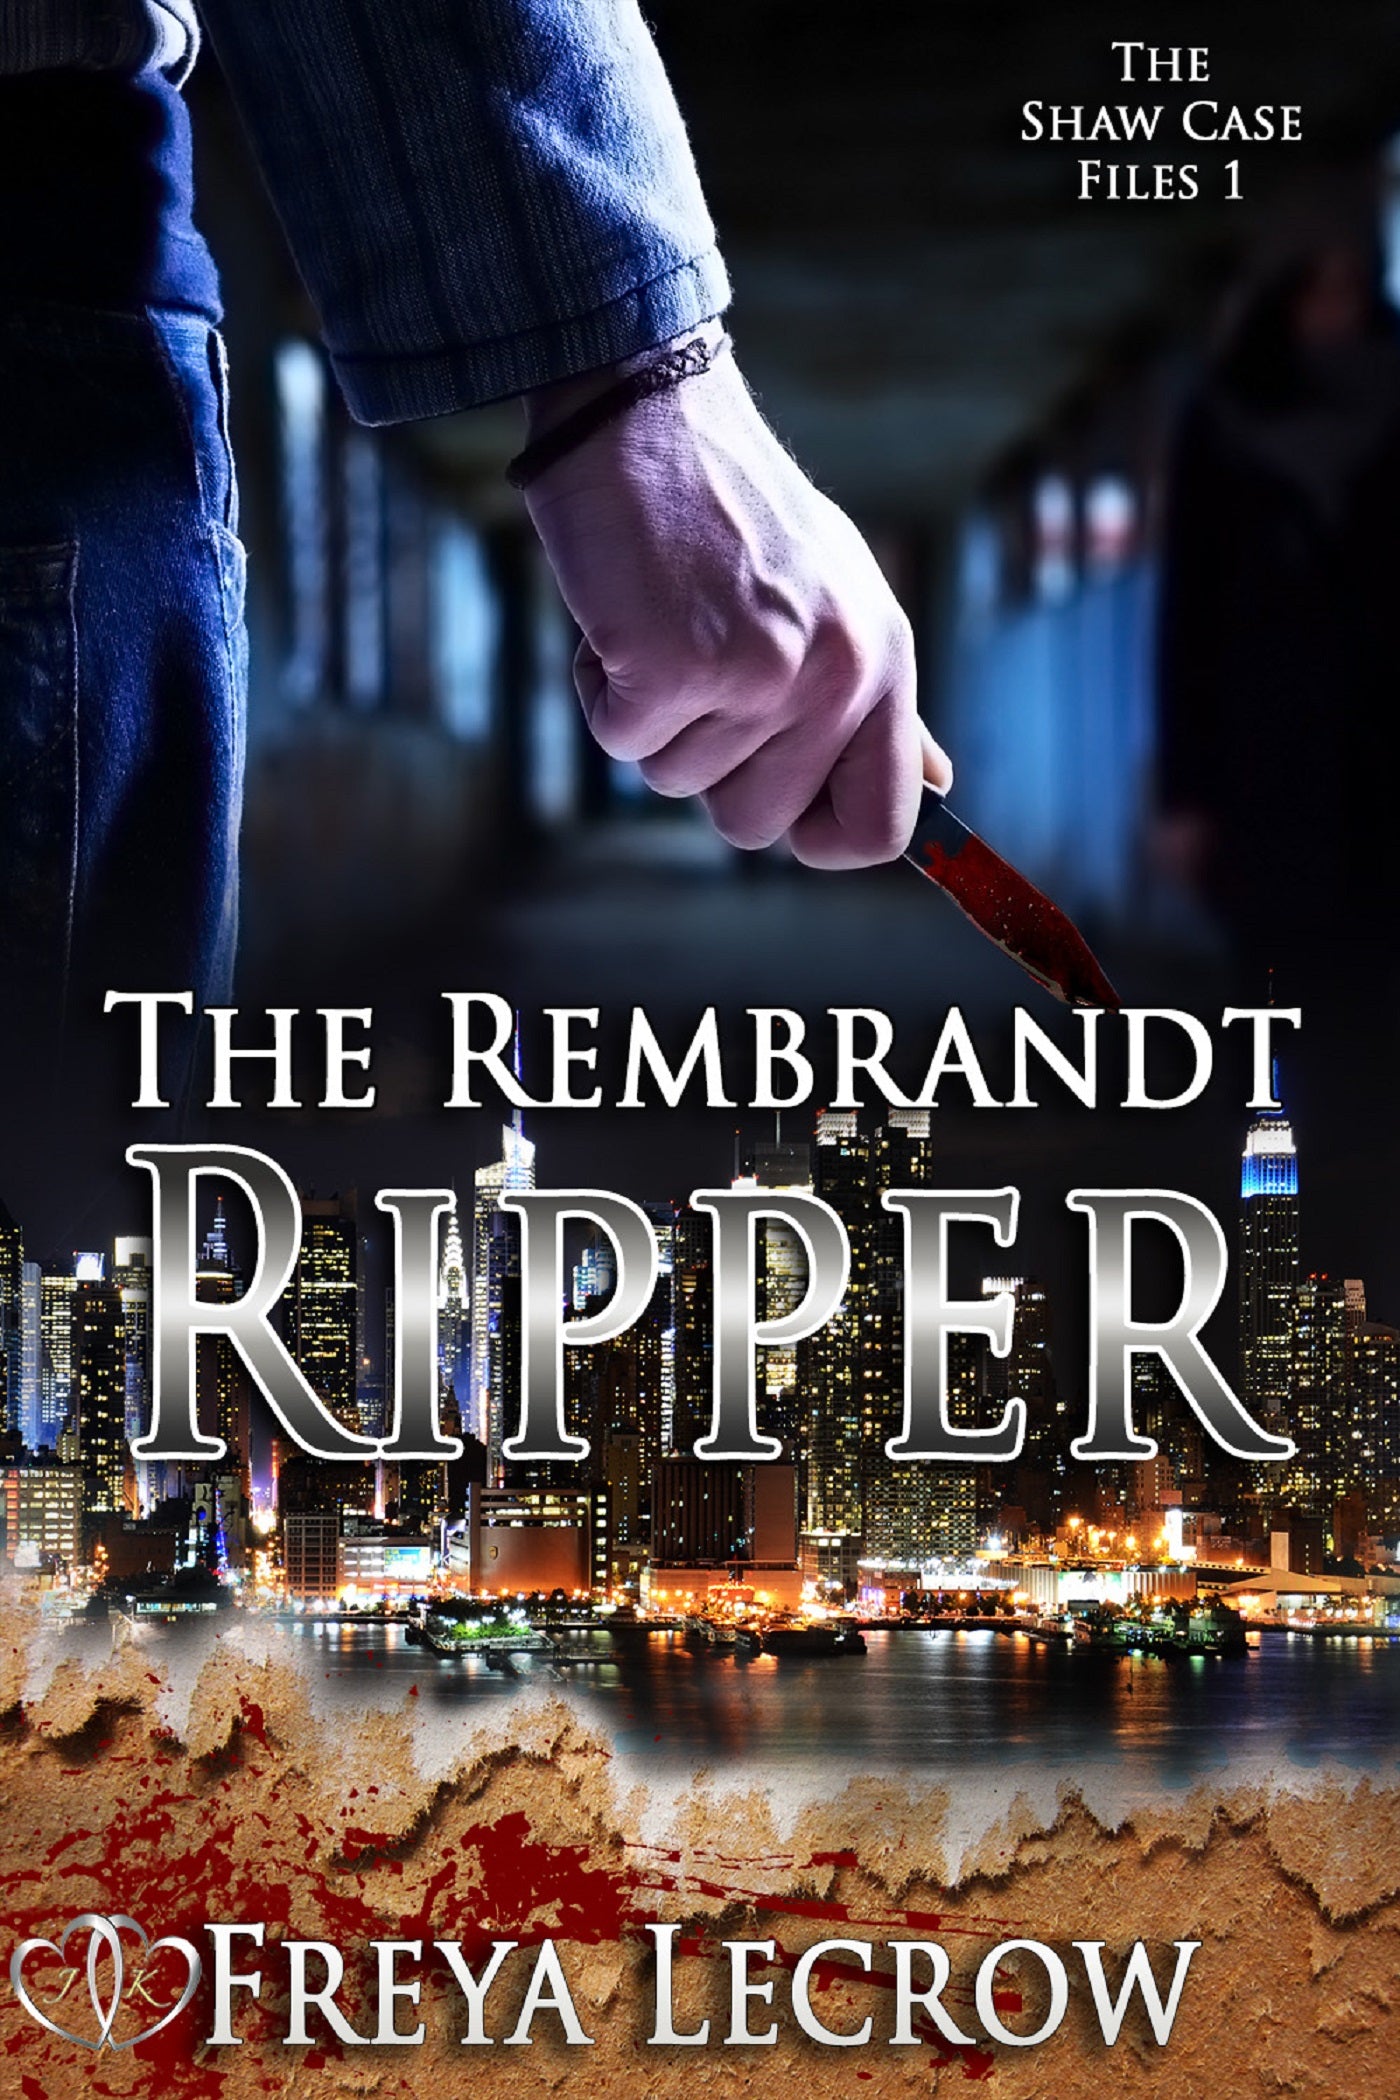 Book Review: The Rembrandt Ripper by Freya LeCrow